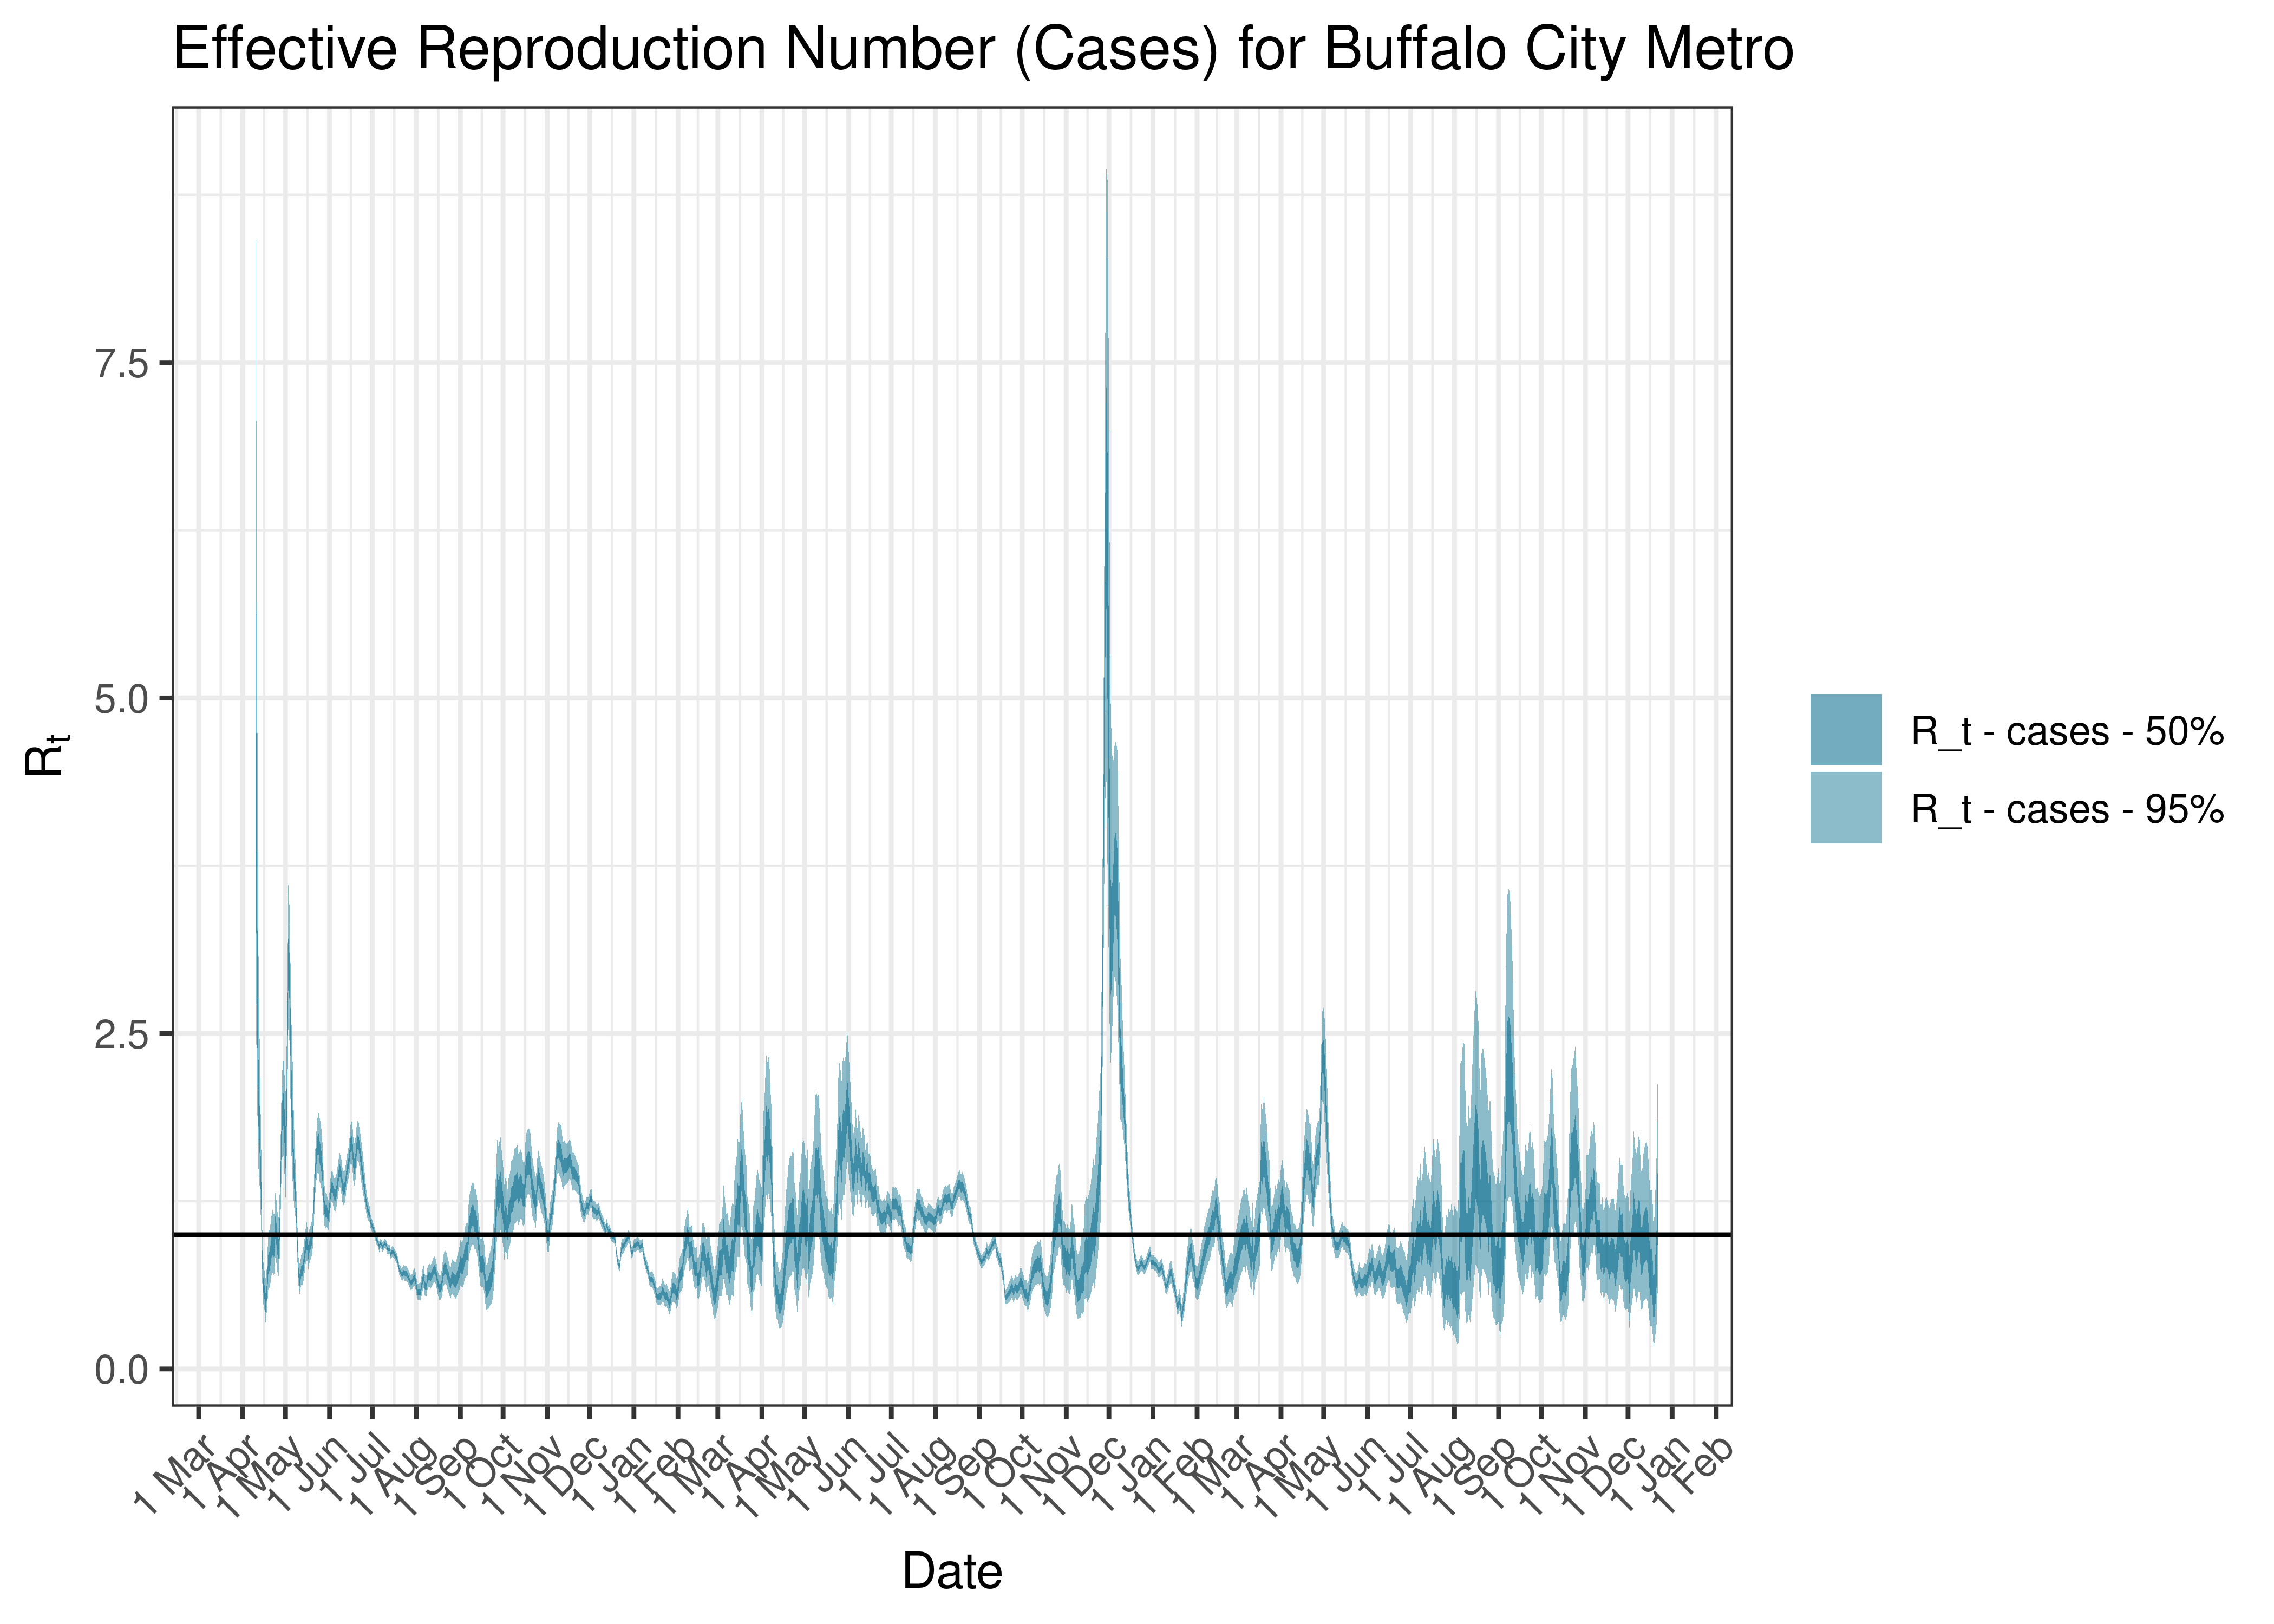 Estimated Effective Reproduction Number Based on Cases for Buffalo City Metro since 1 April 2020